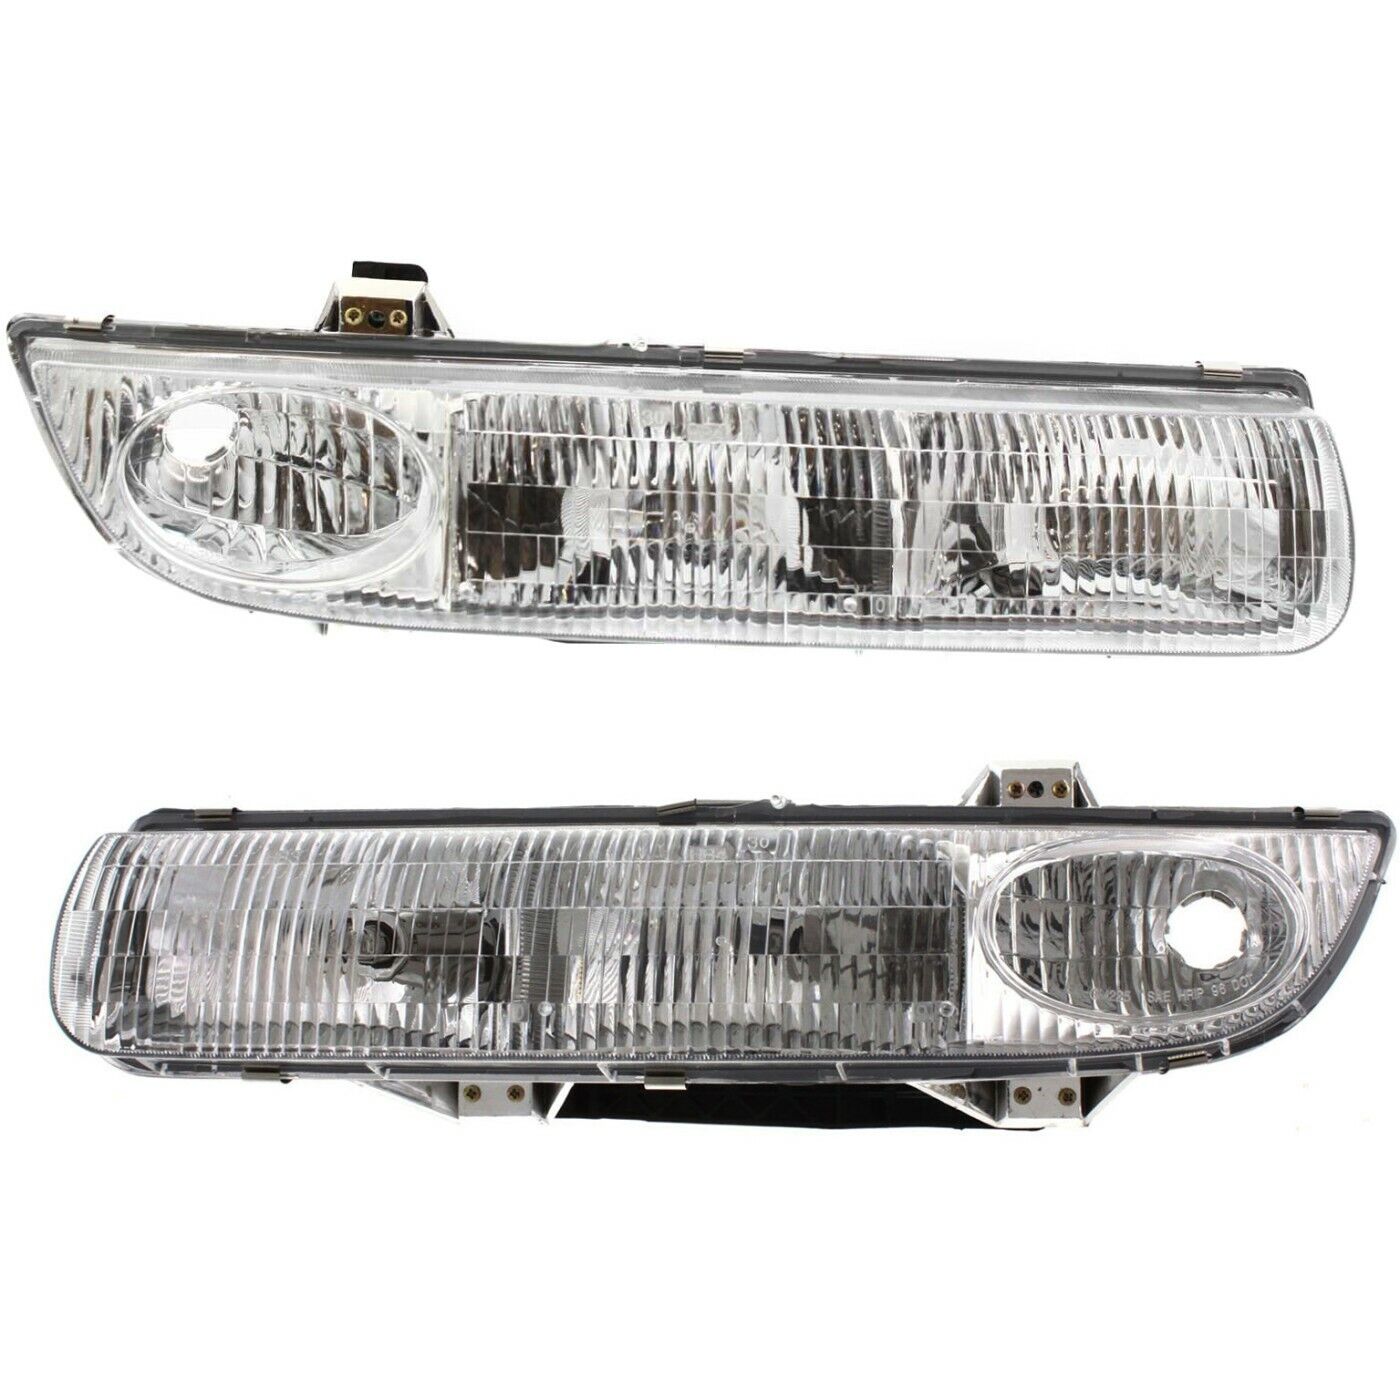 Headlight Set For 96 97 98 99 Saturn SL2 SW1 Left and Right With Bulb 2Pc